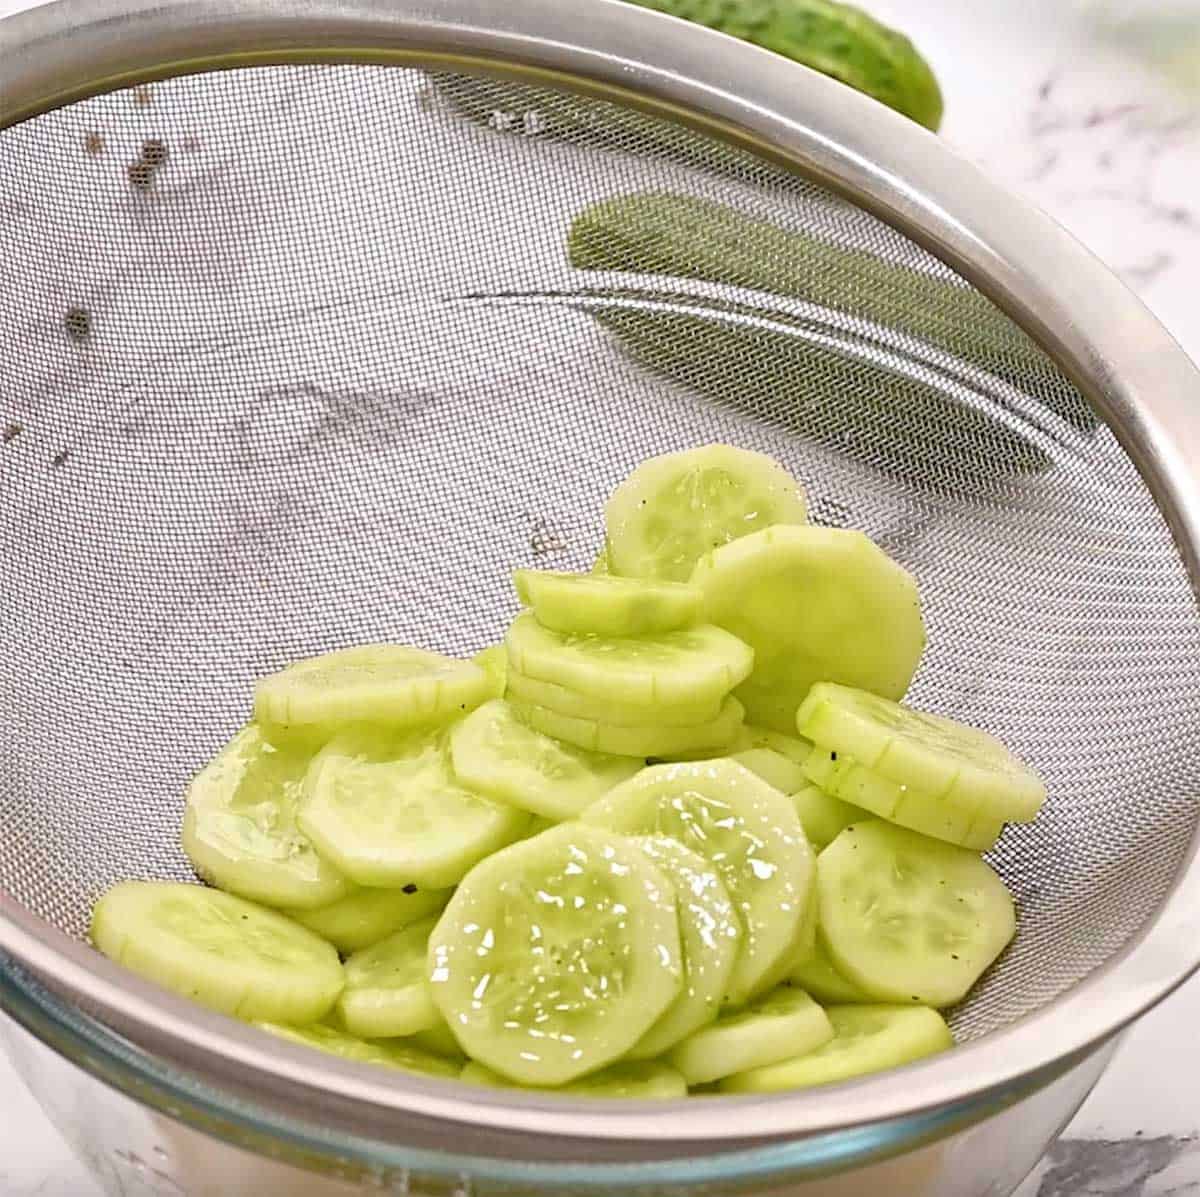 draining marinated cucumbers in a metal strainer